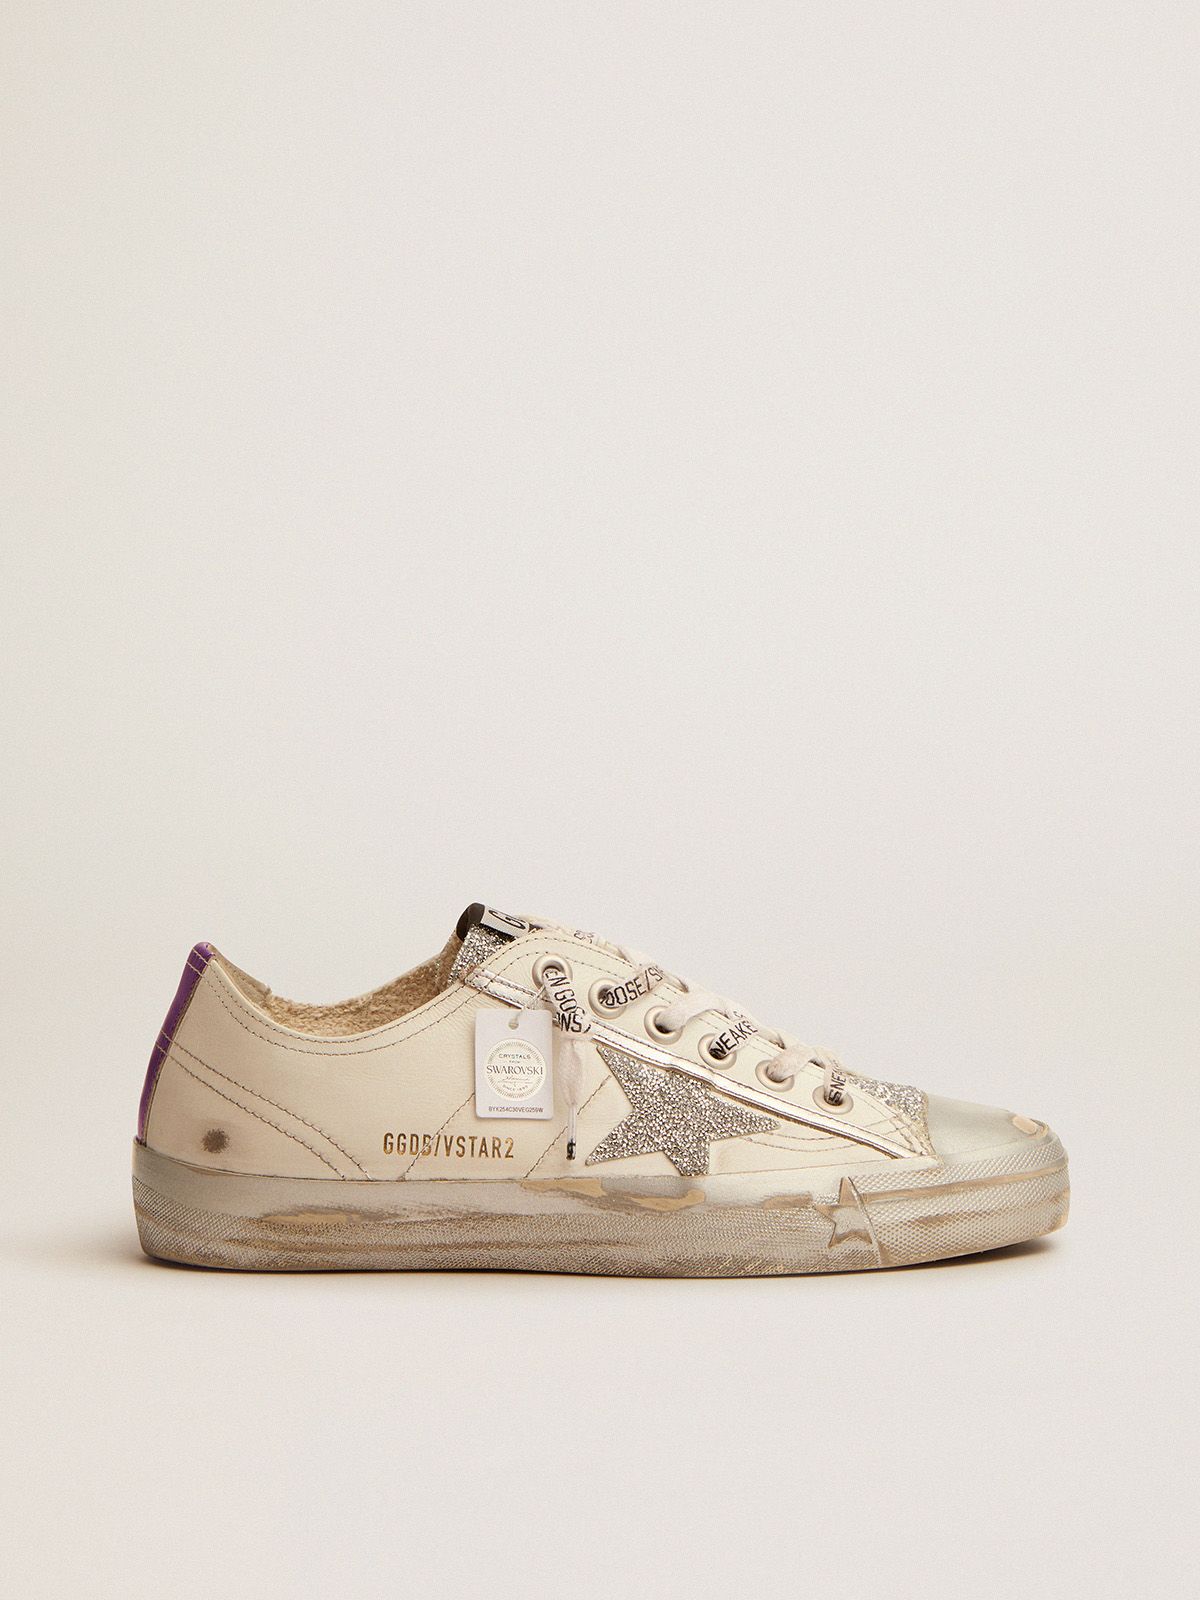 golden goose V-Star crystals LTD in leather and white sneakers